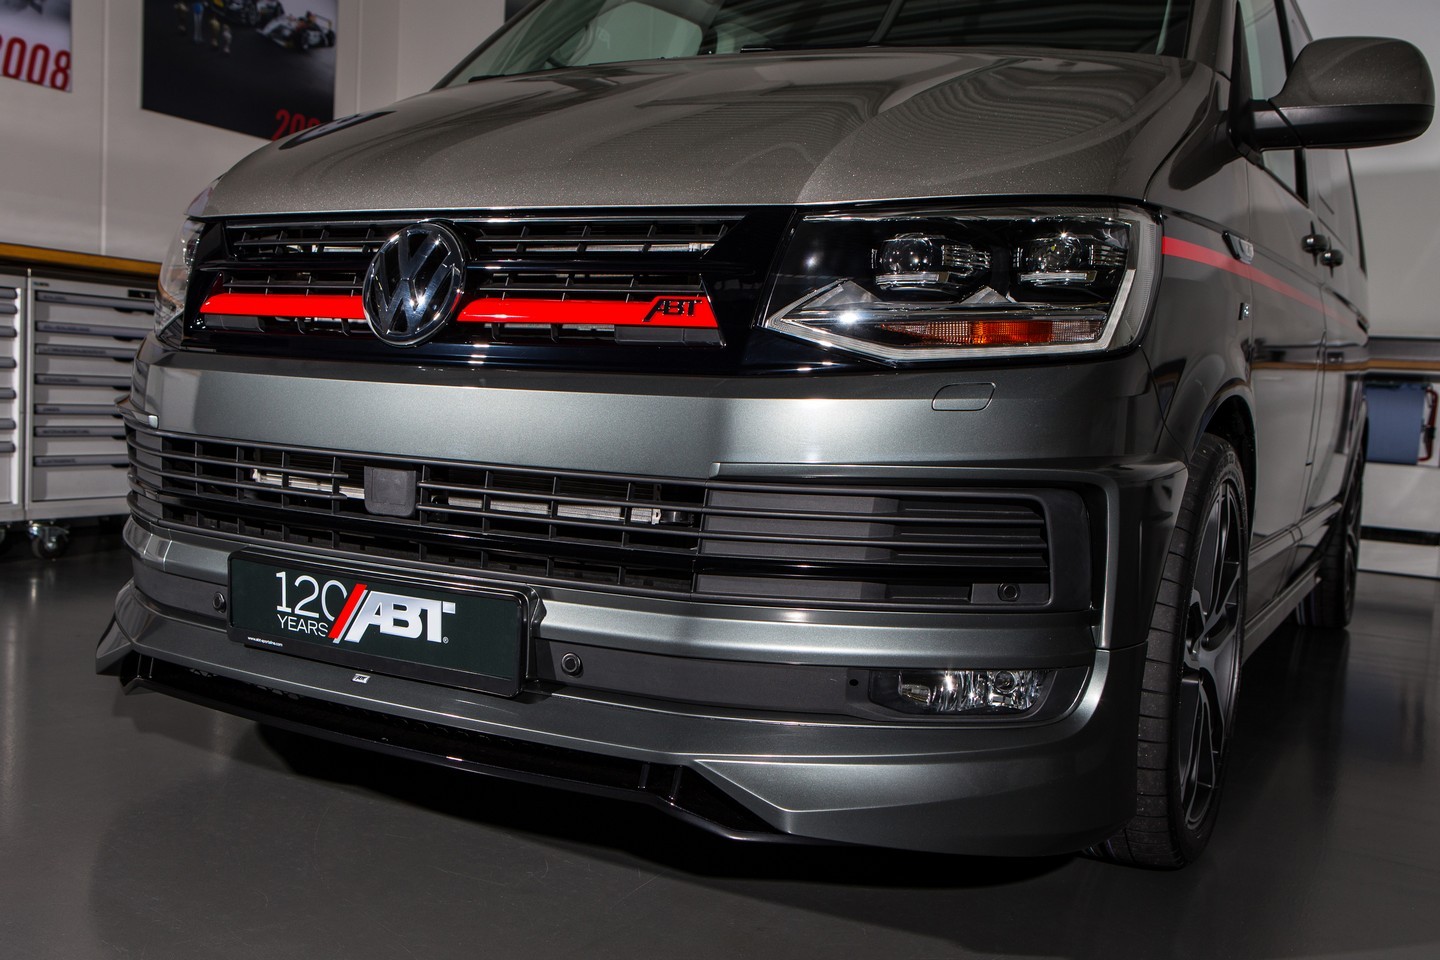 ABT Makes Coolest Volkswagen T6 Tuning Project for Geneva - autoevolution